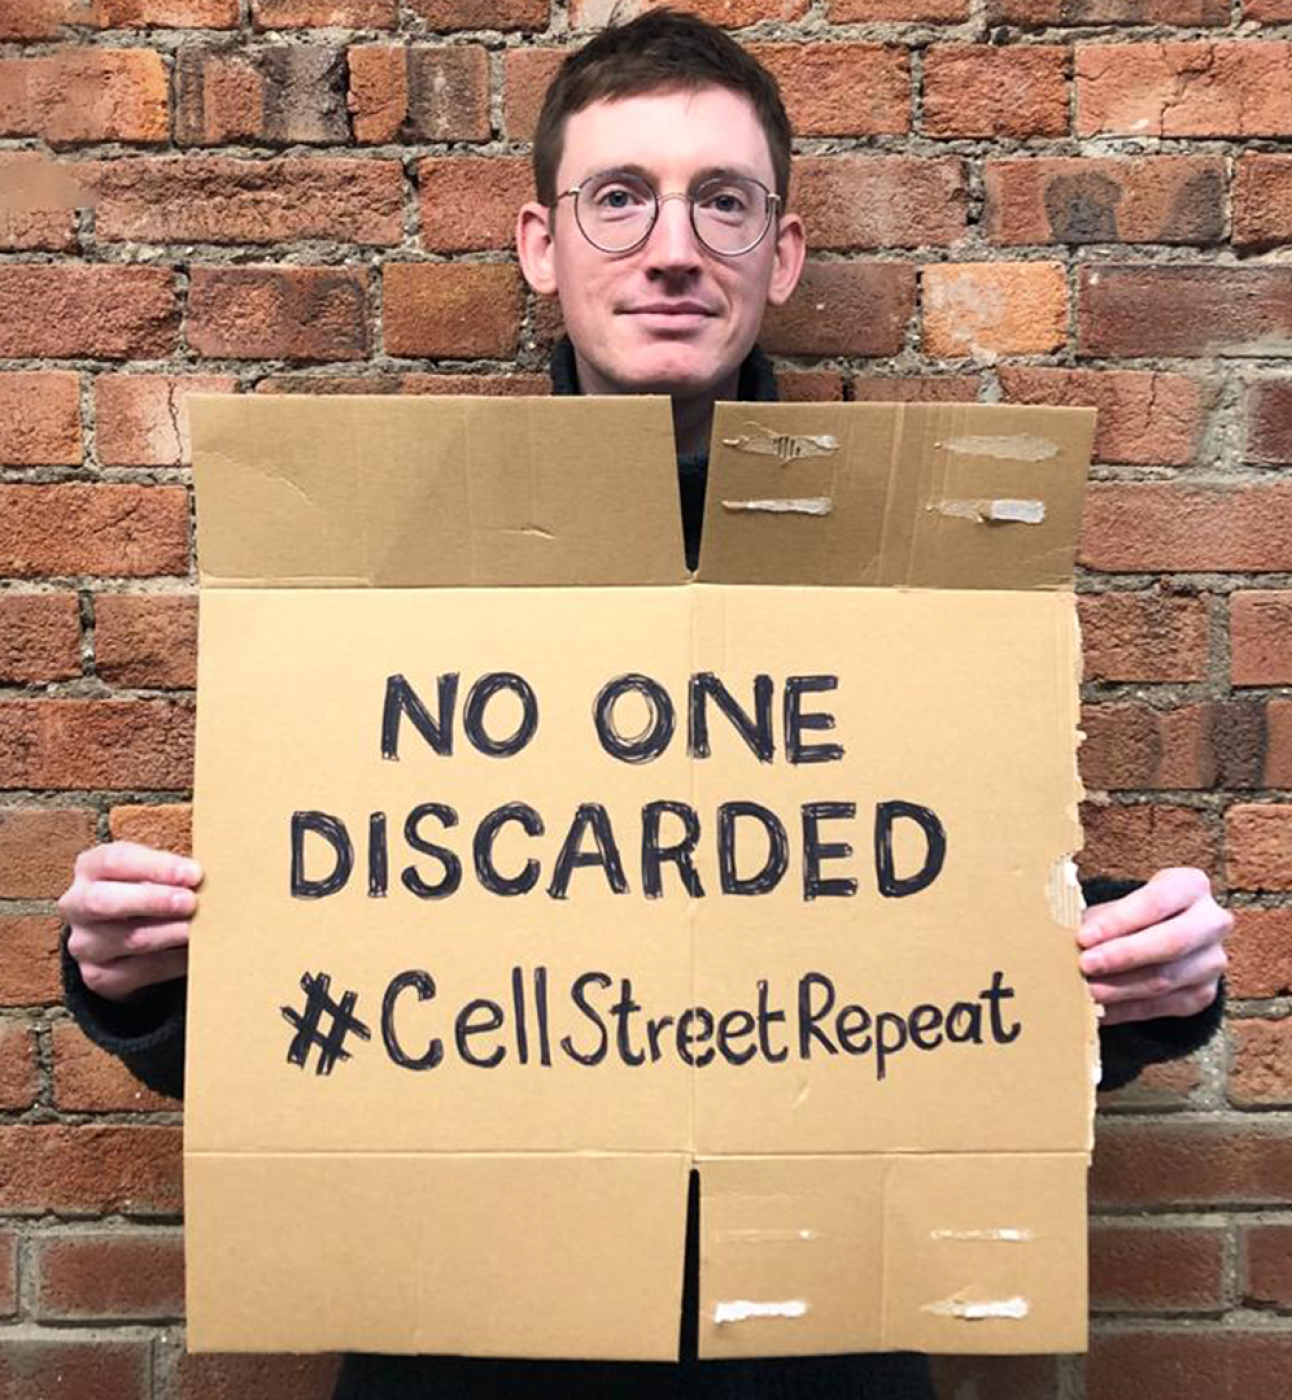 image of service user campaigning for cell street repeat